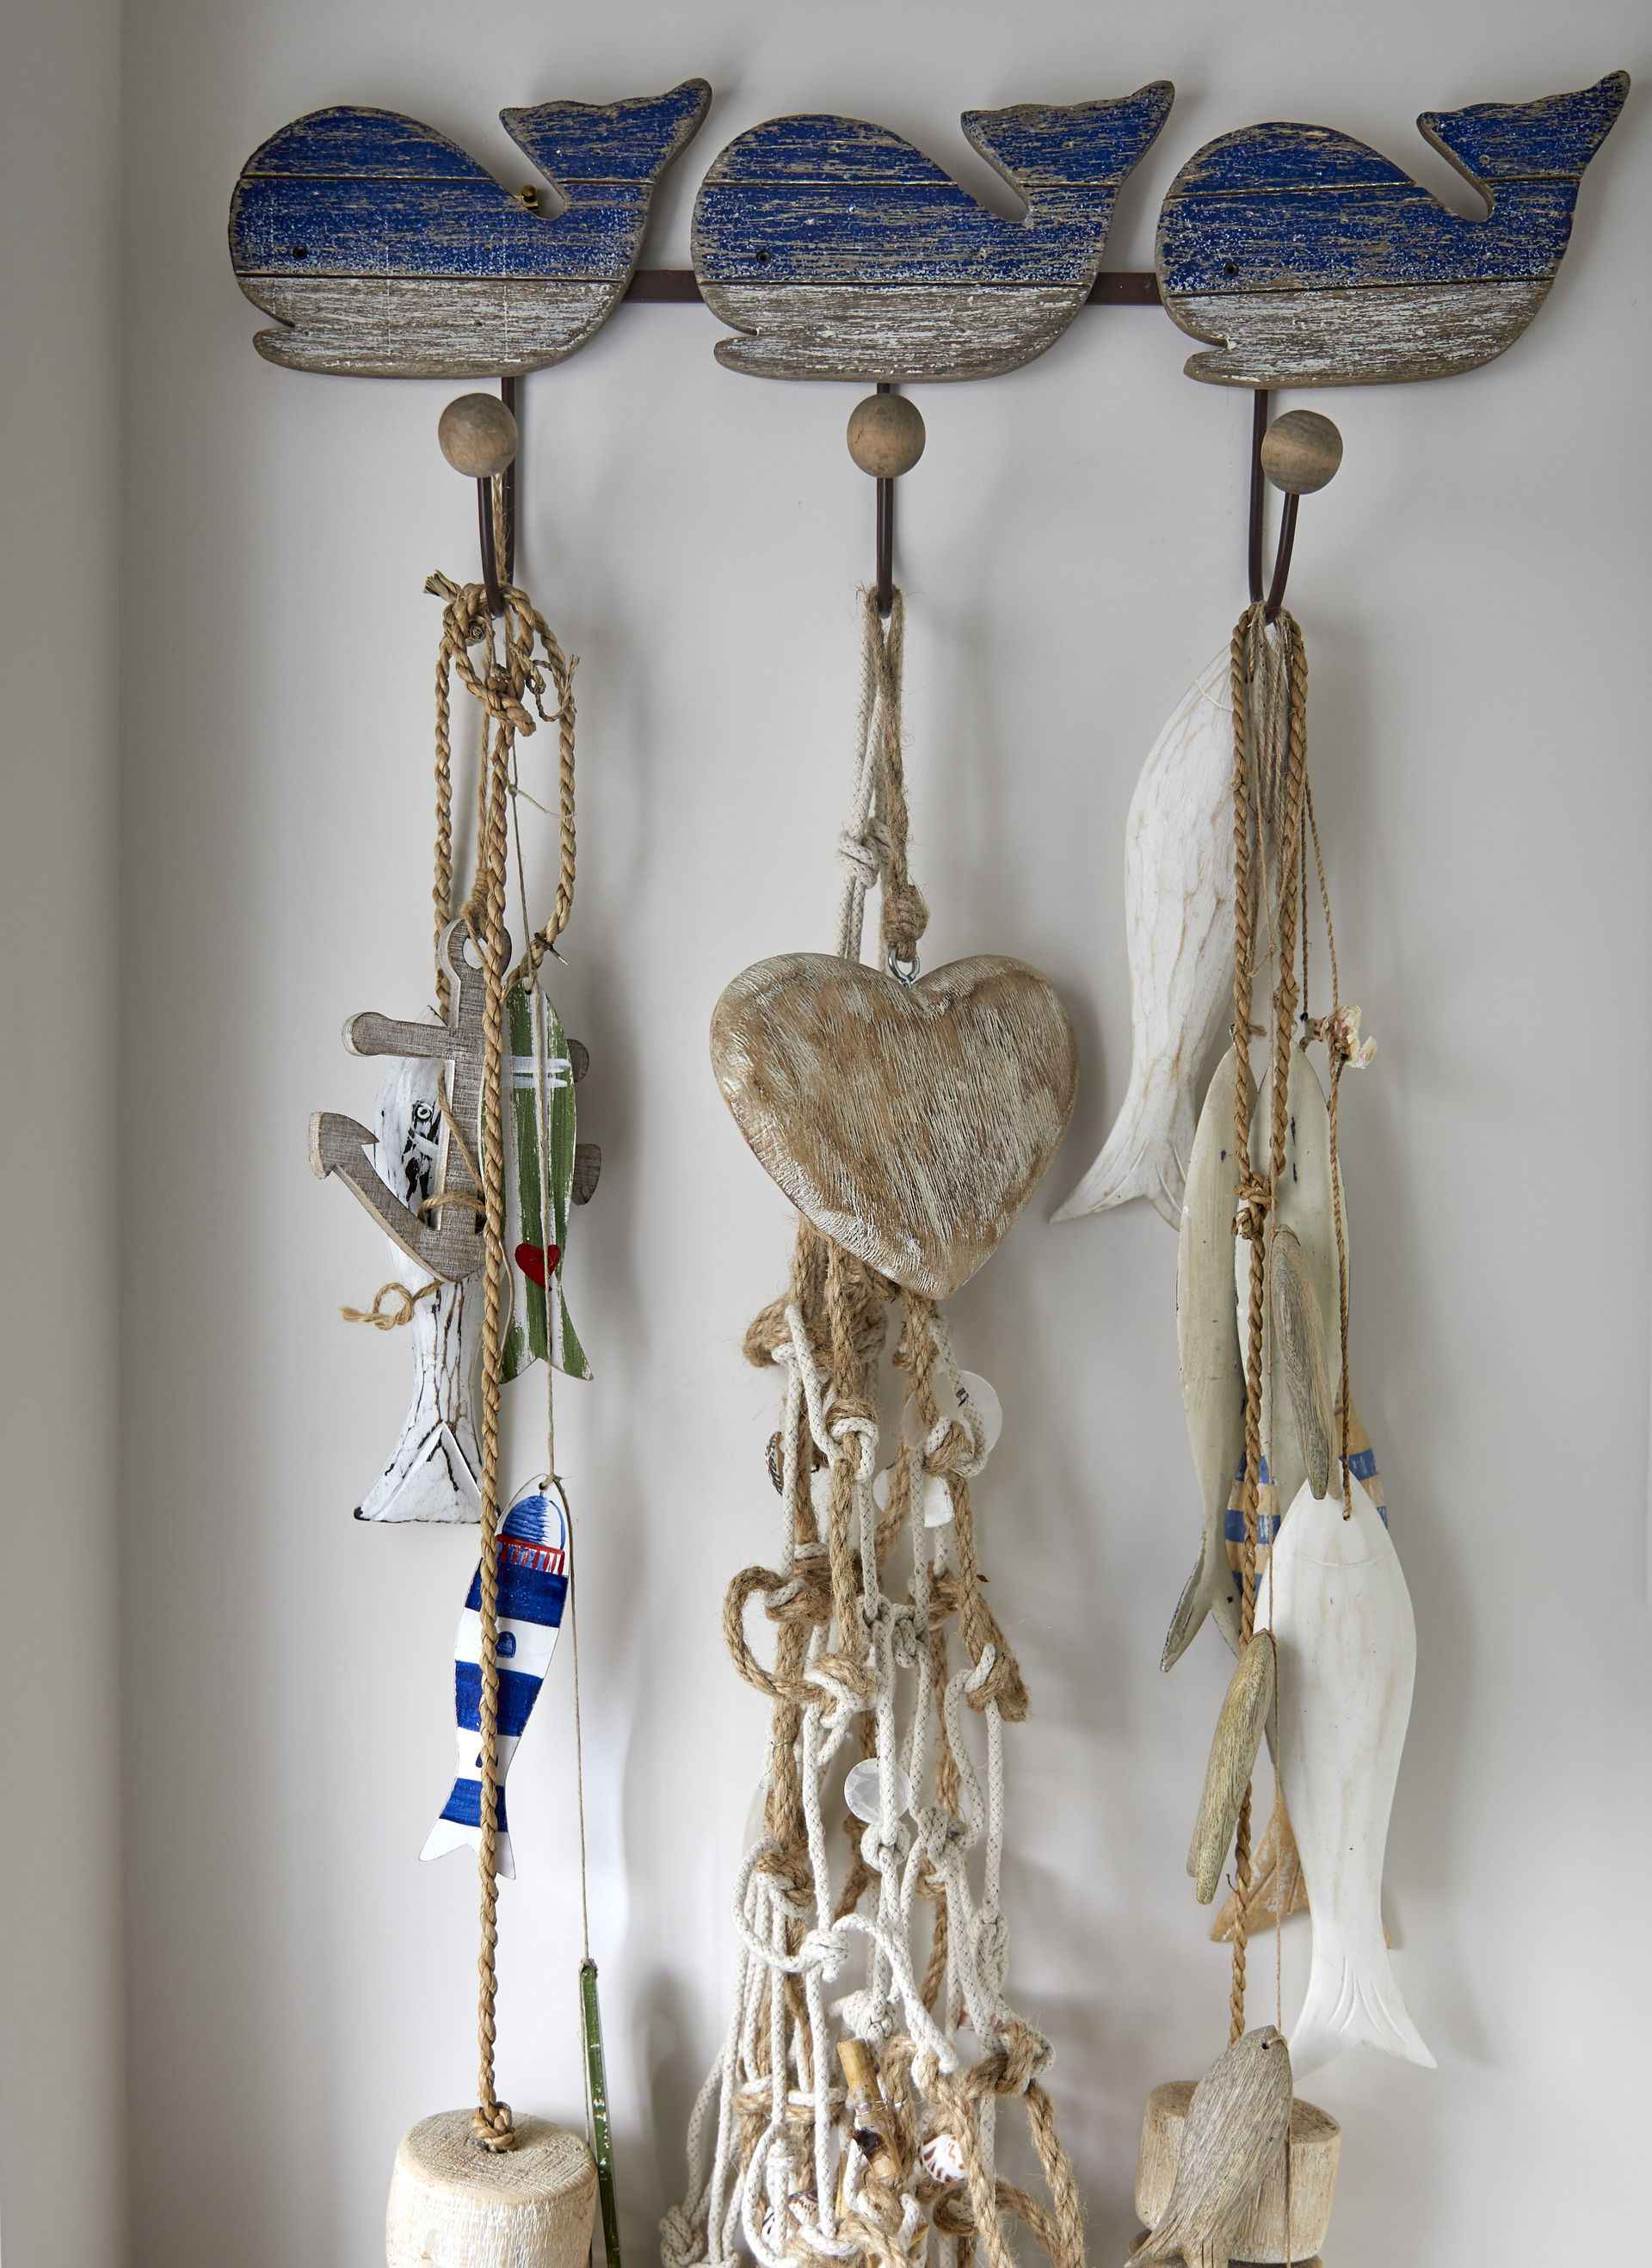 Hanging trinkets on the wall of the pirate room of mountain ash house